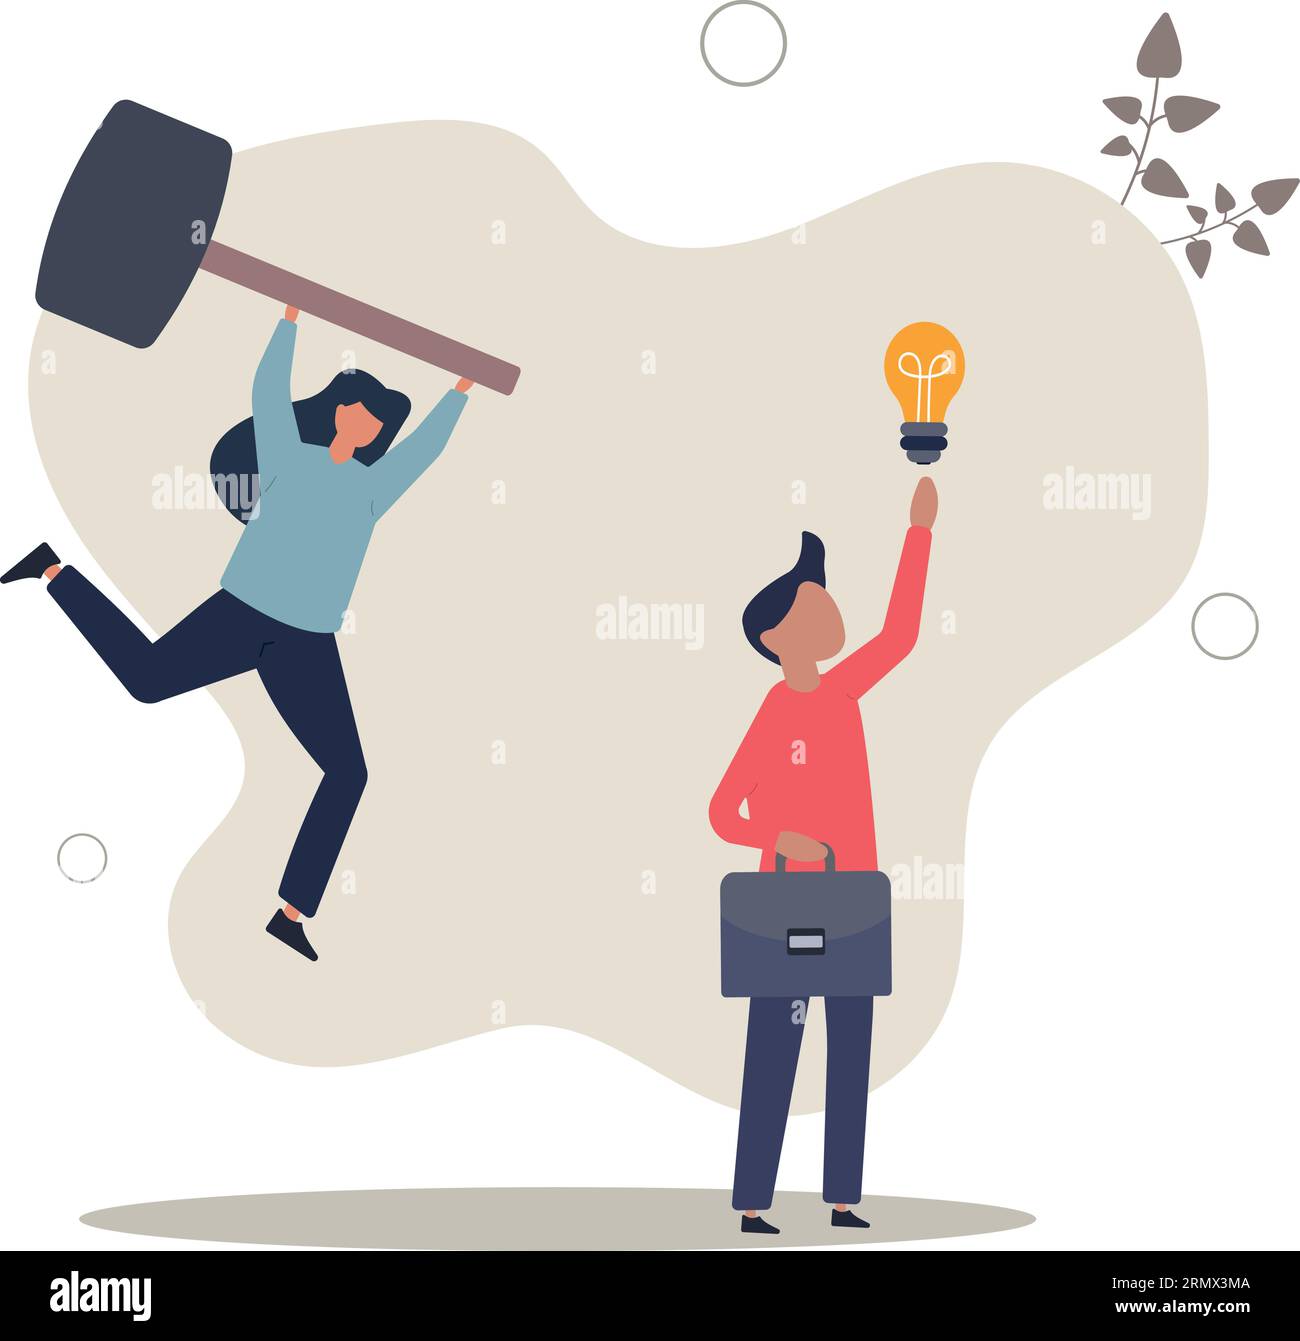 Jealousy colleague, toxic boss kill all ideas never been implemented, envy or dishonesty coworker with unprofessional.flat vector illustration. Stock Vector